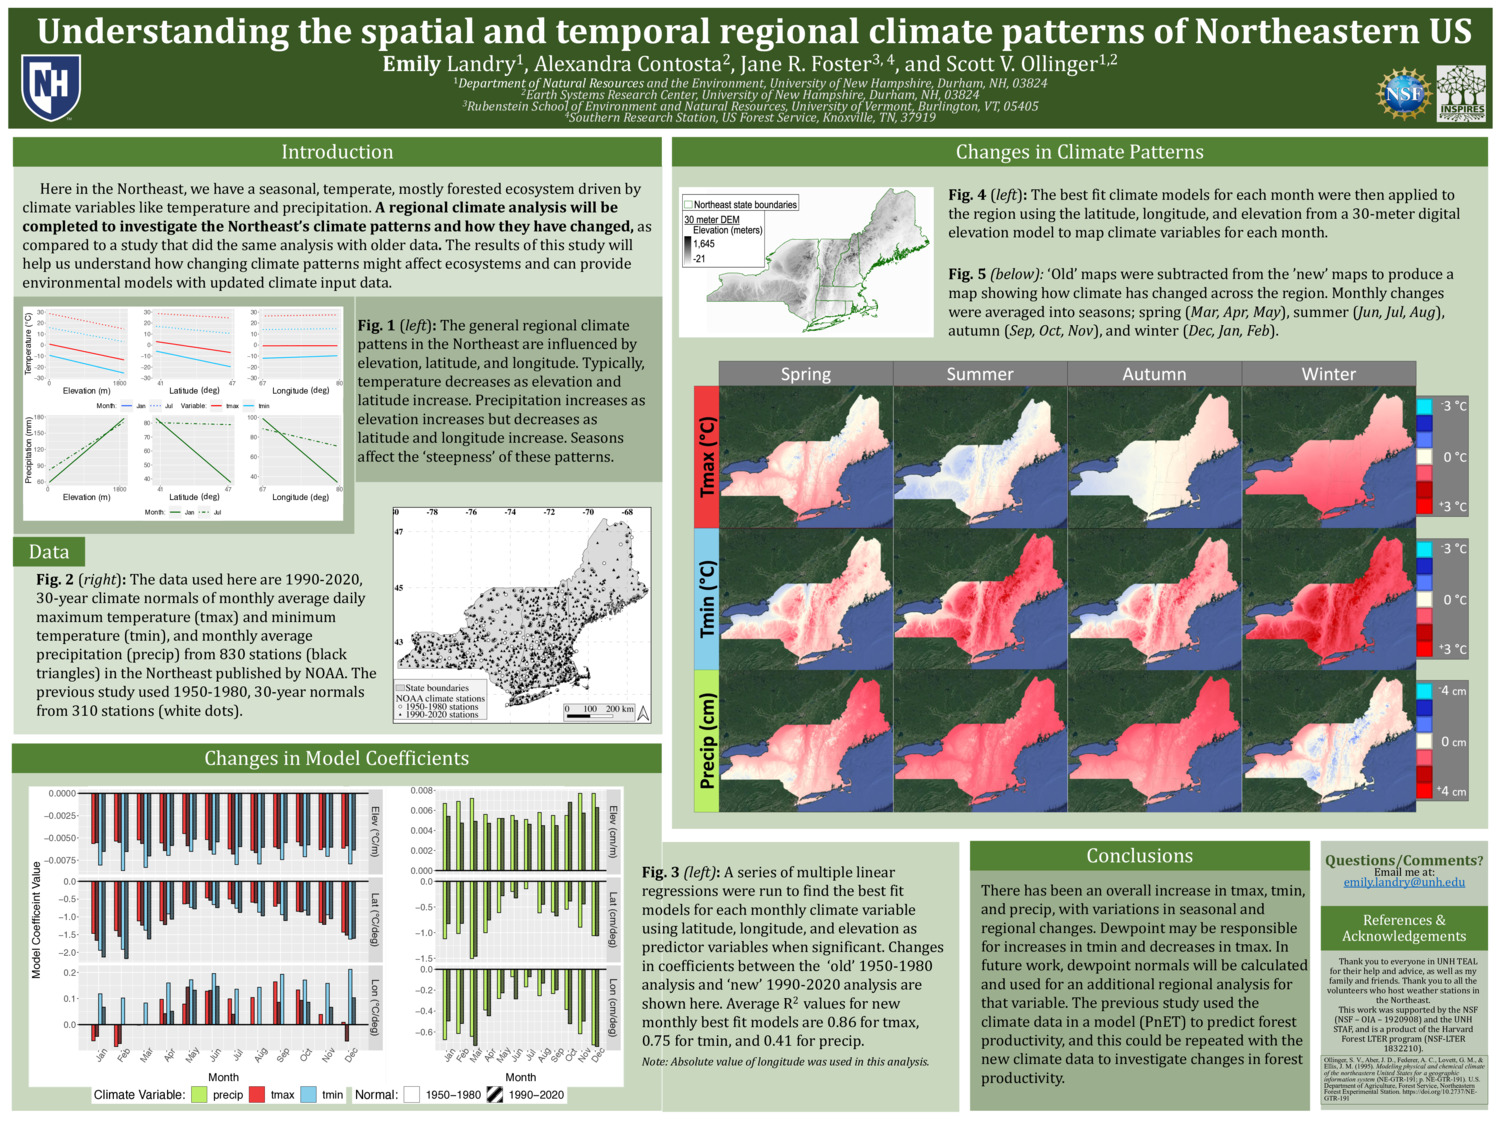 Understanding The Spatial And Temporal Regional Climate Patterns Of Northeastern Us by erl2000